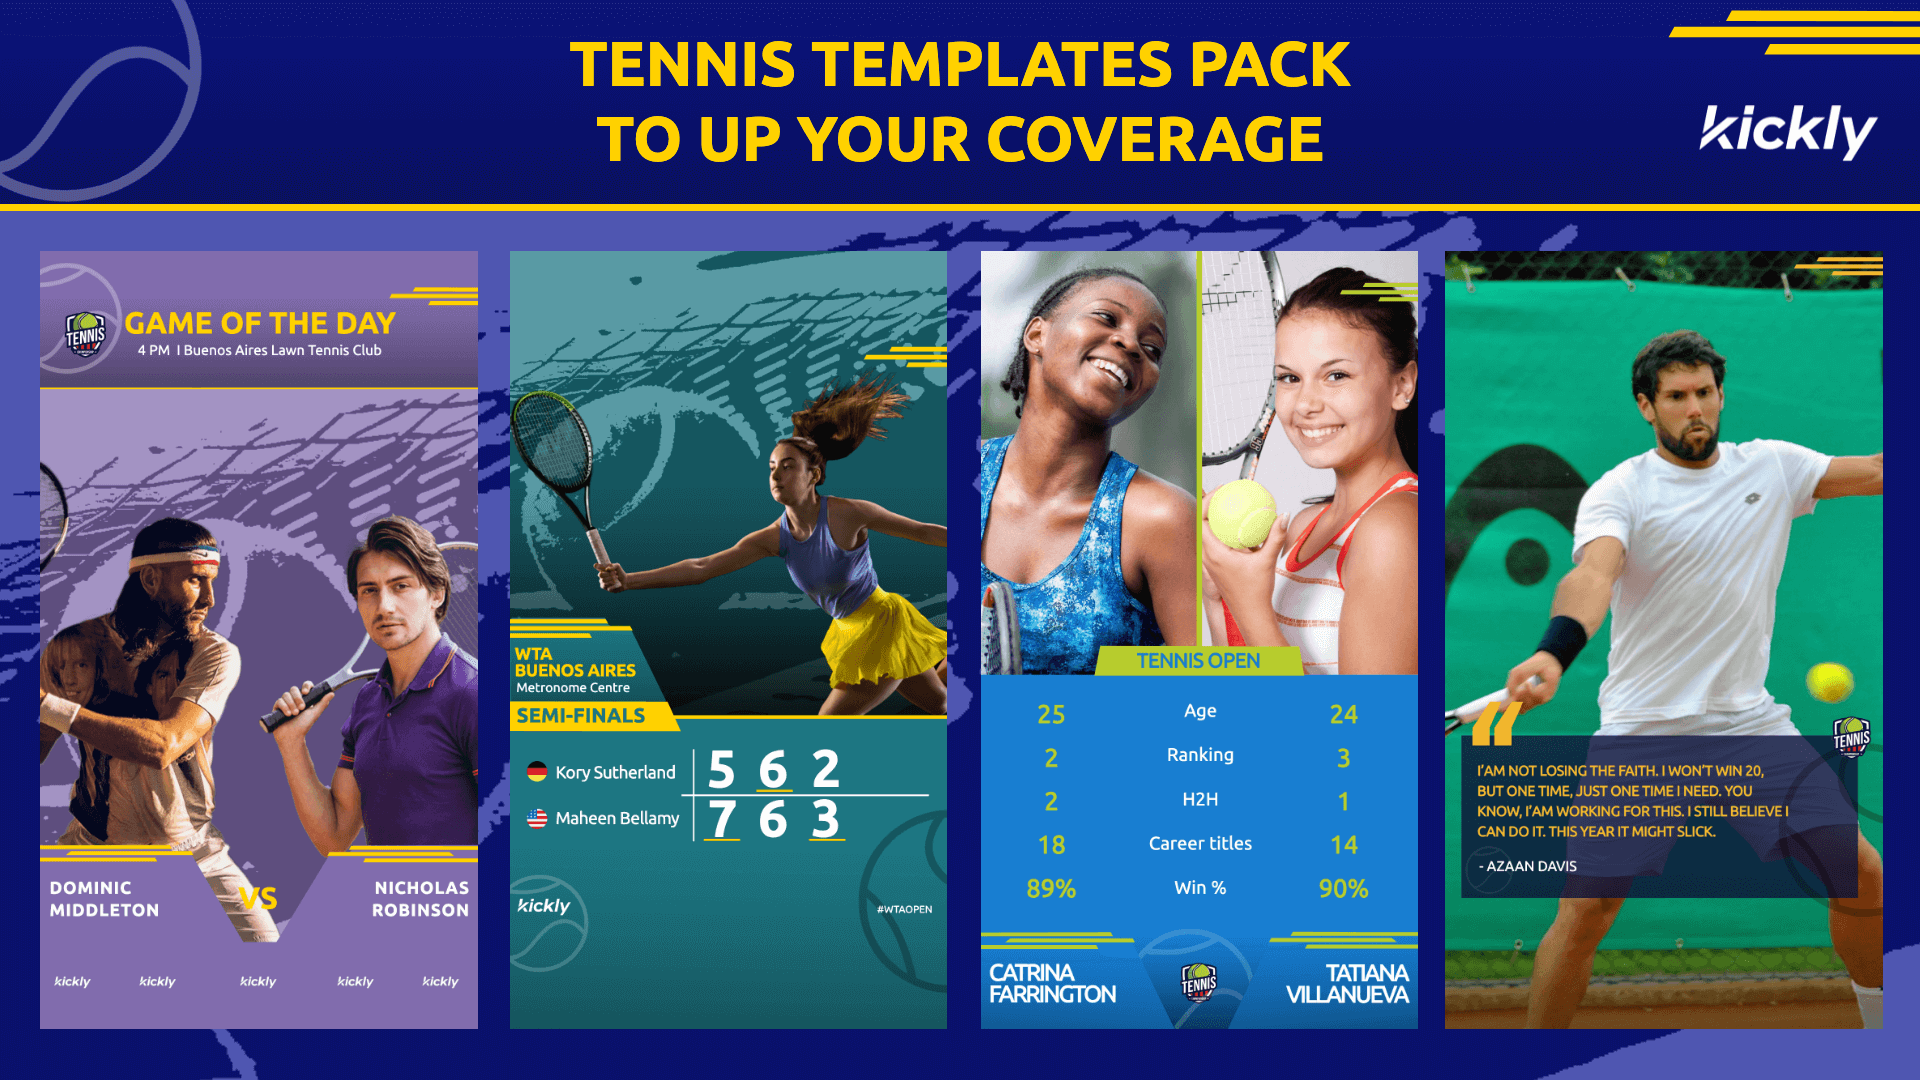 The Perfect Tennis Templates to Score your Game, Set, and Match